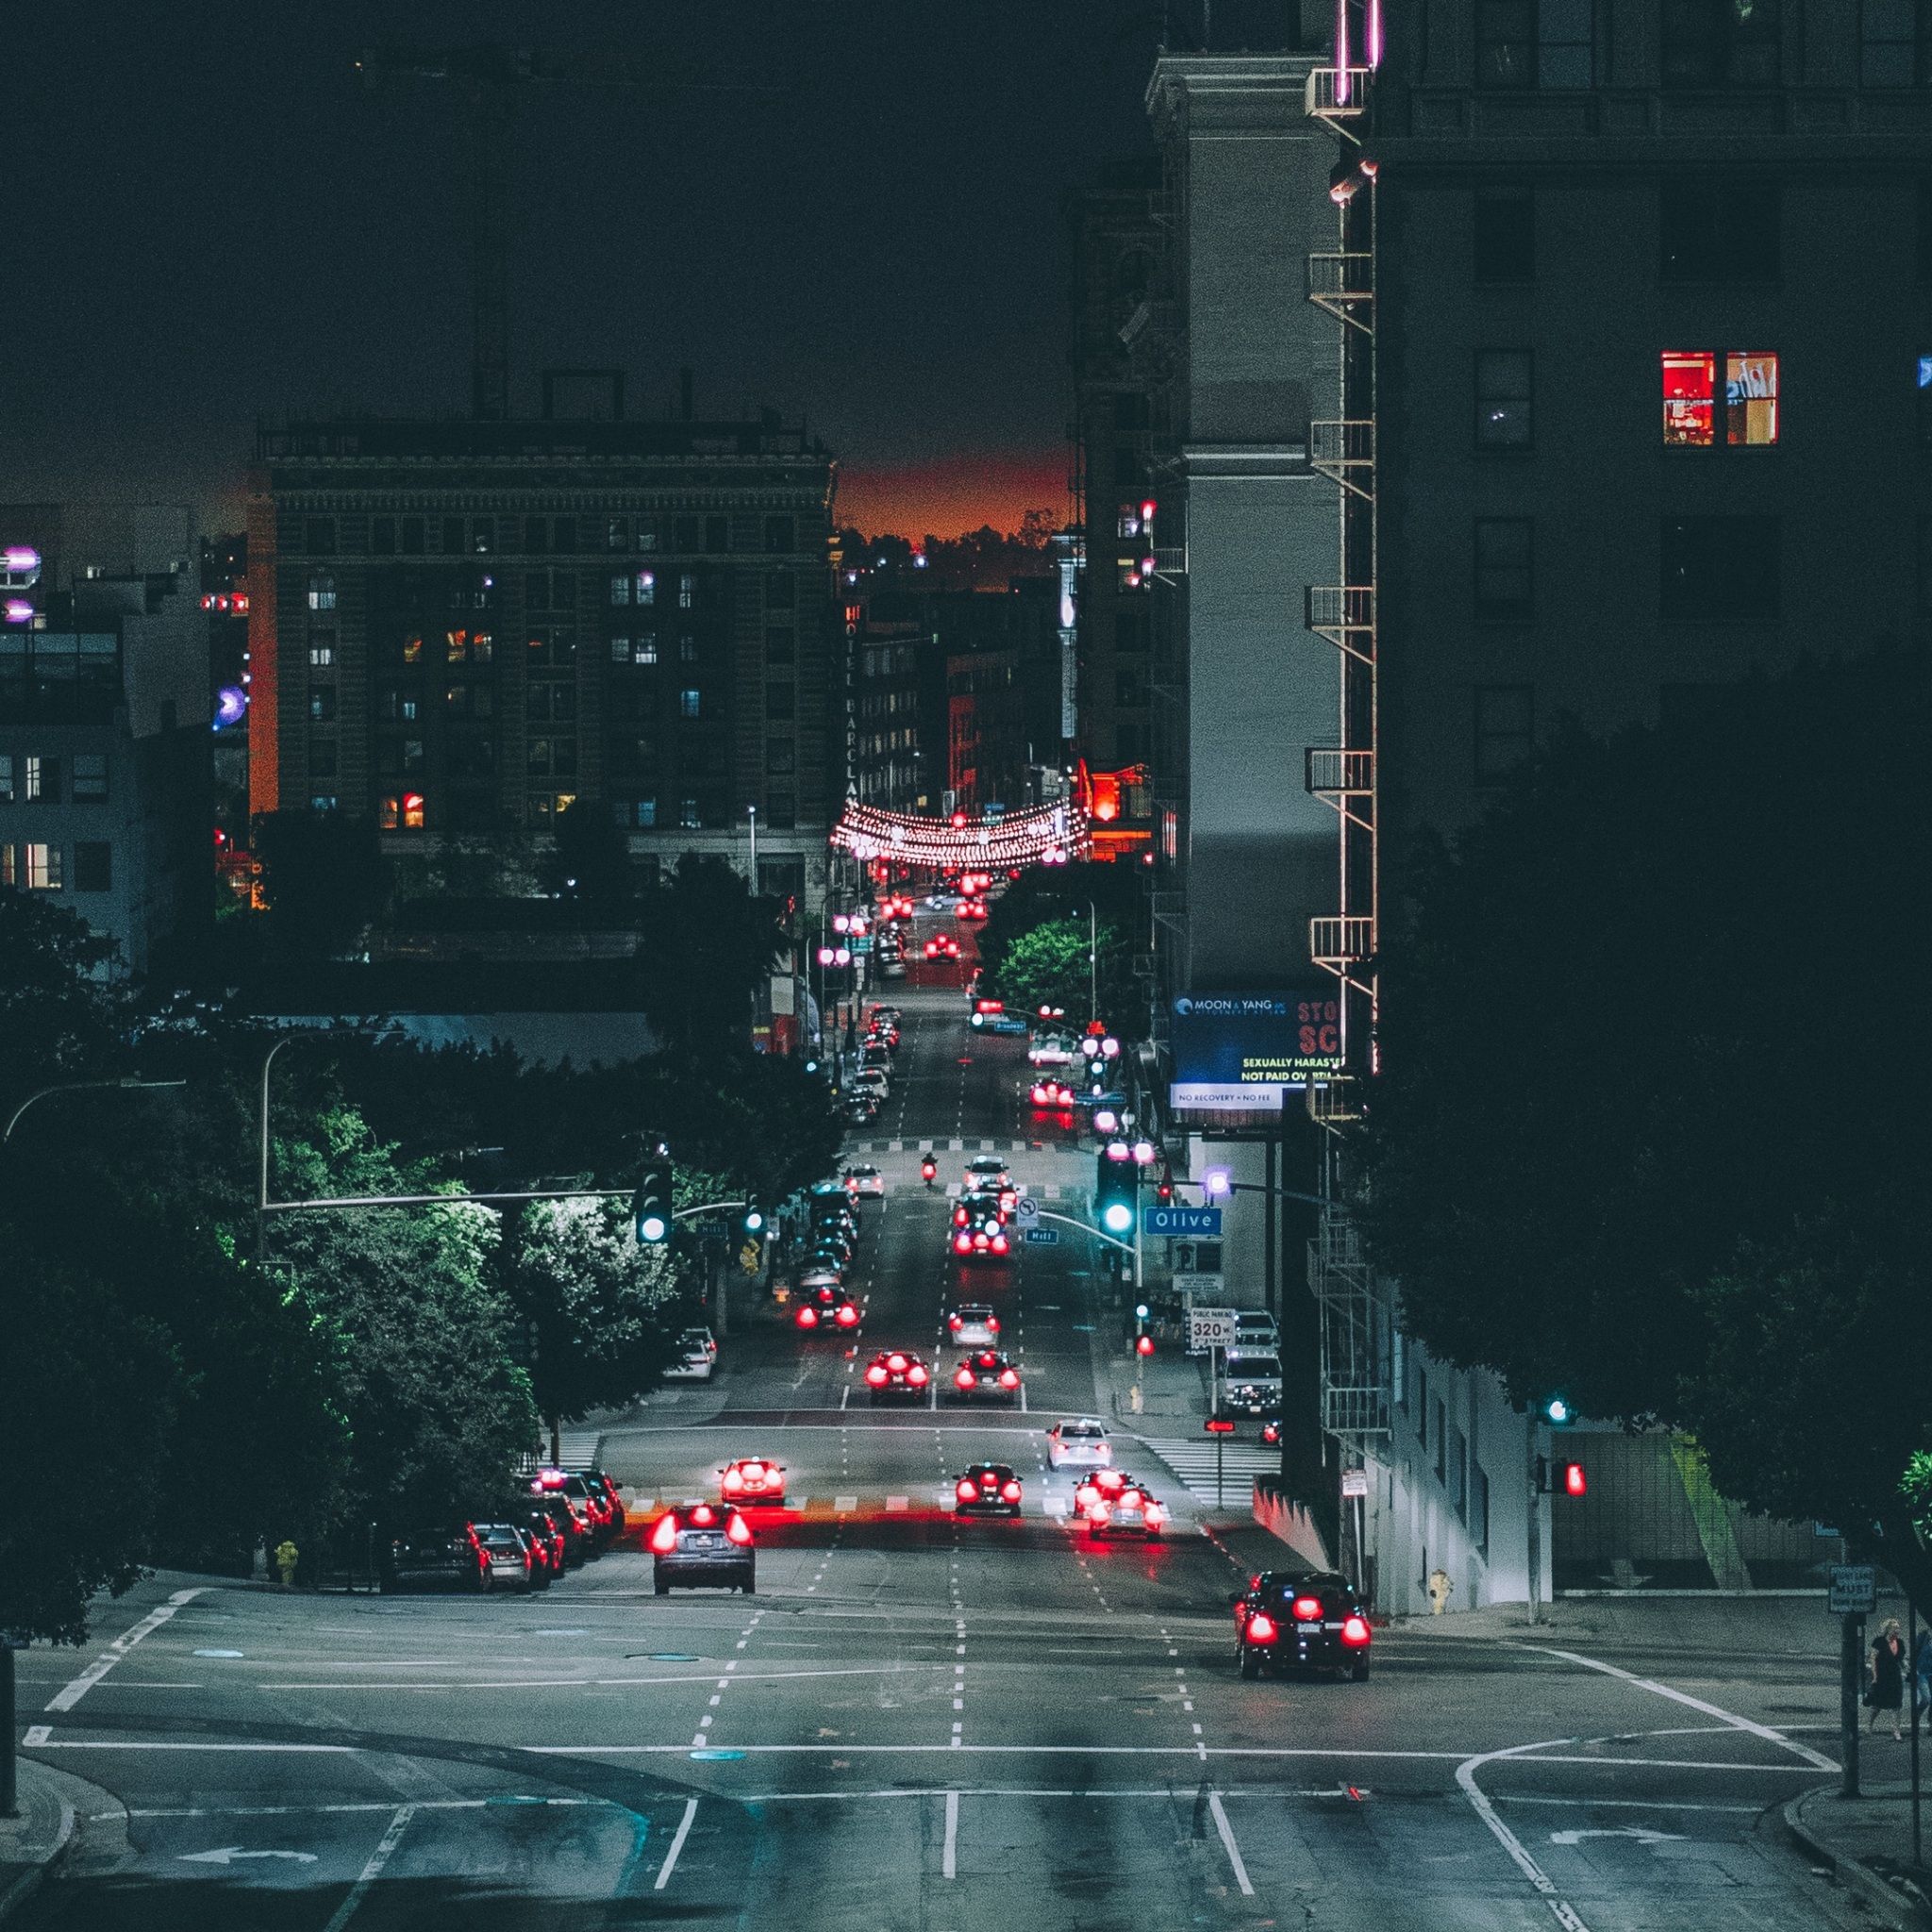 A city street at night with traffic - Los Angeles